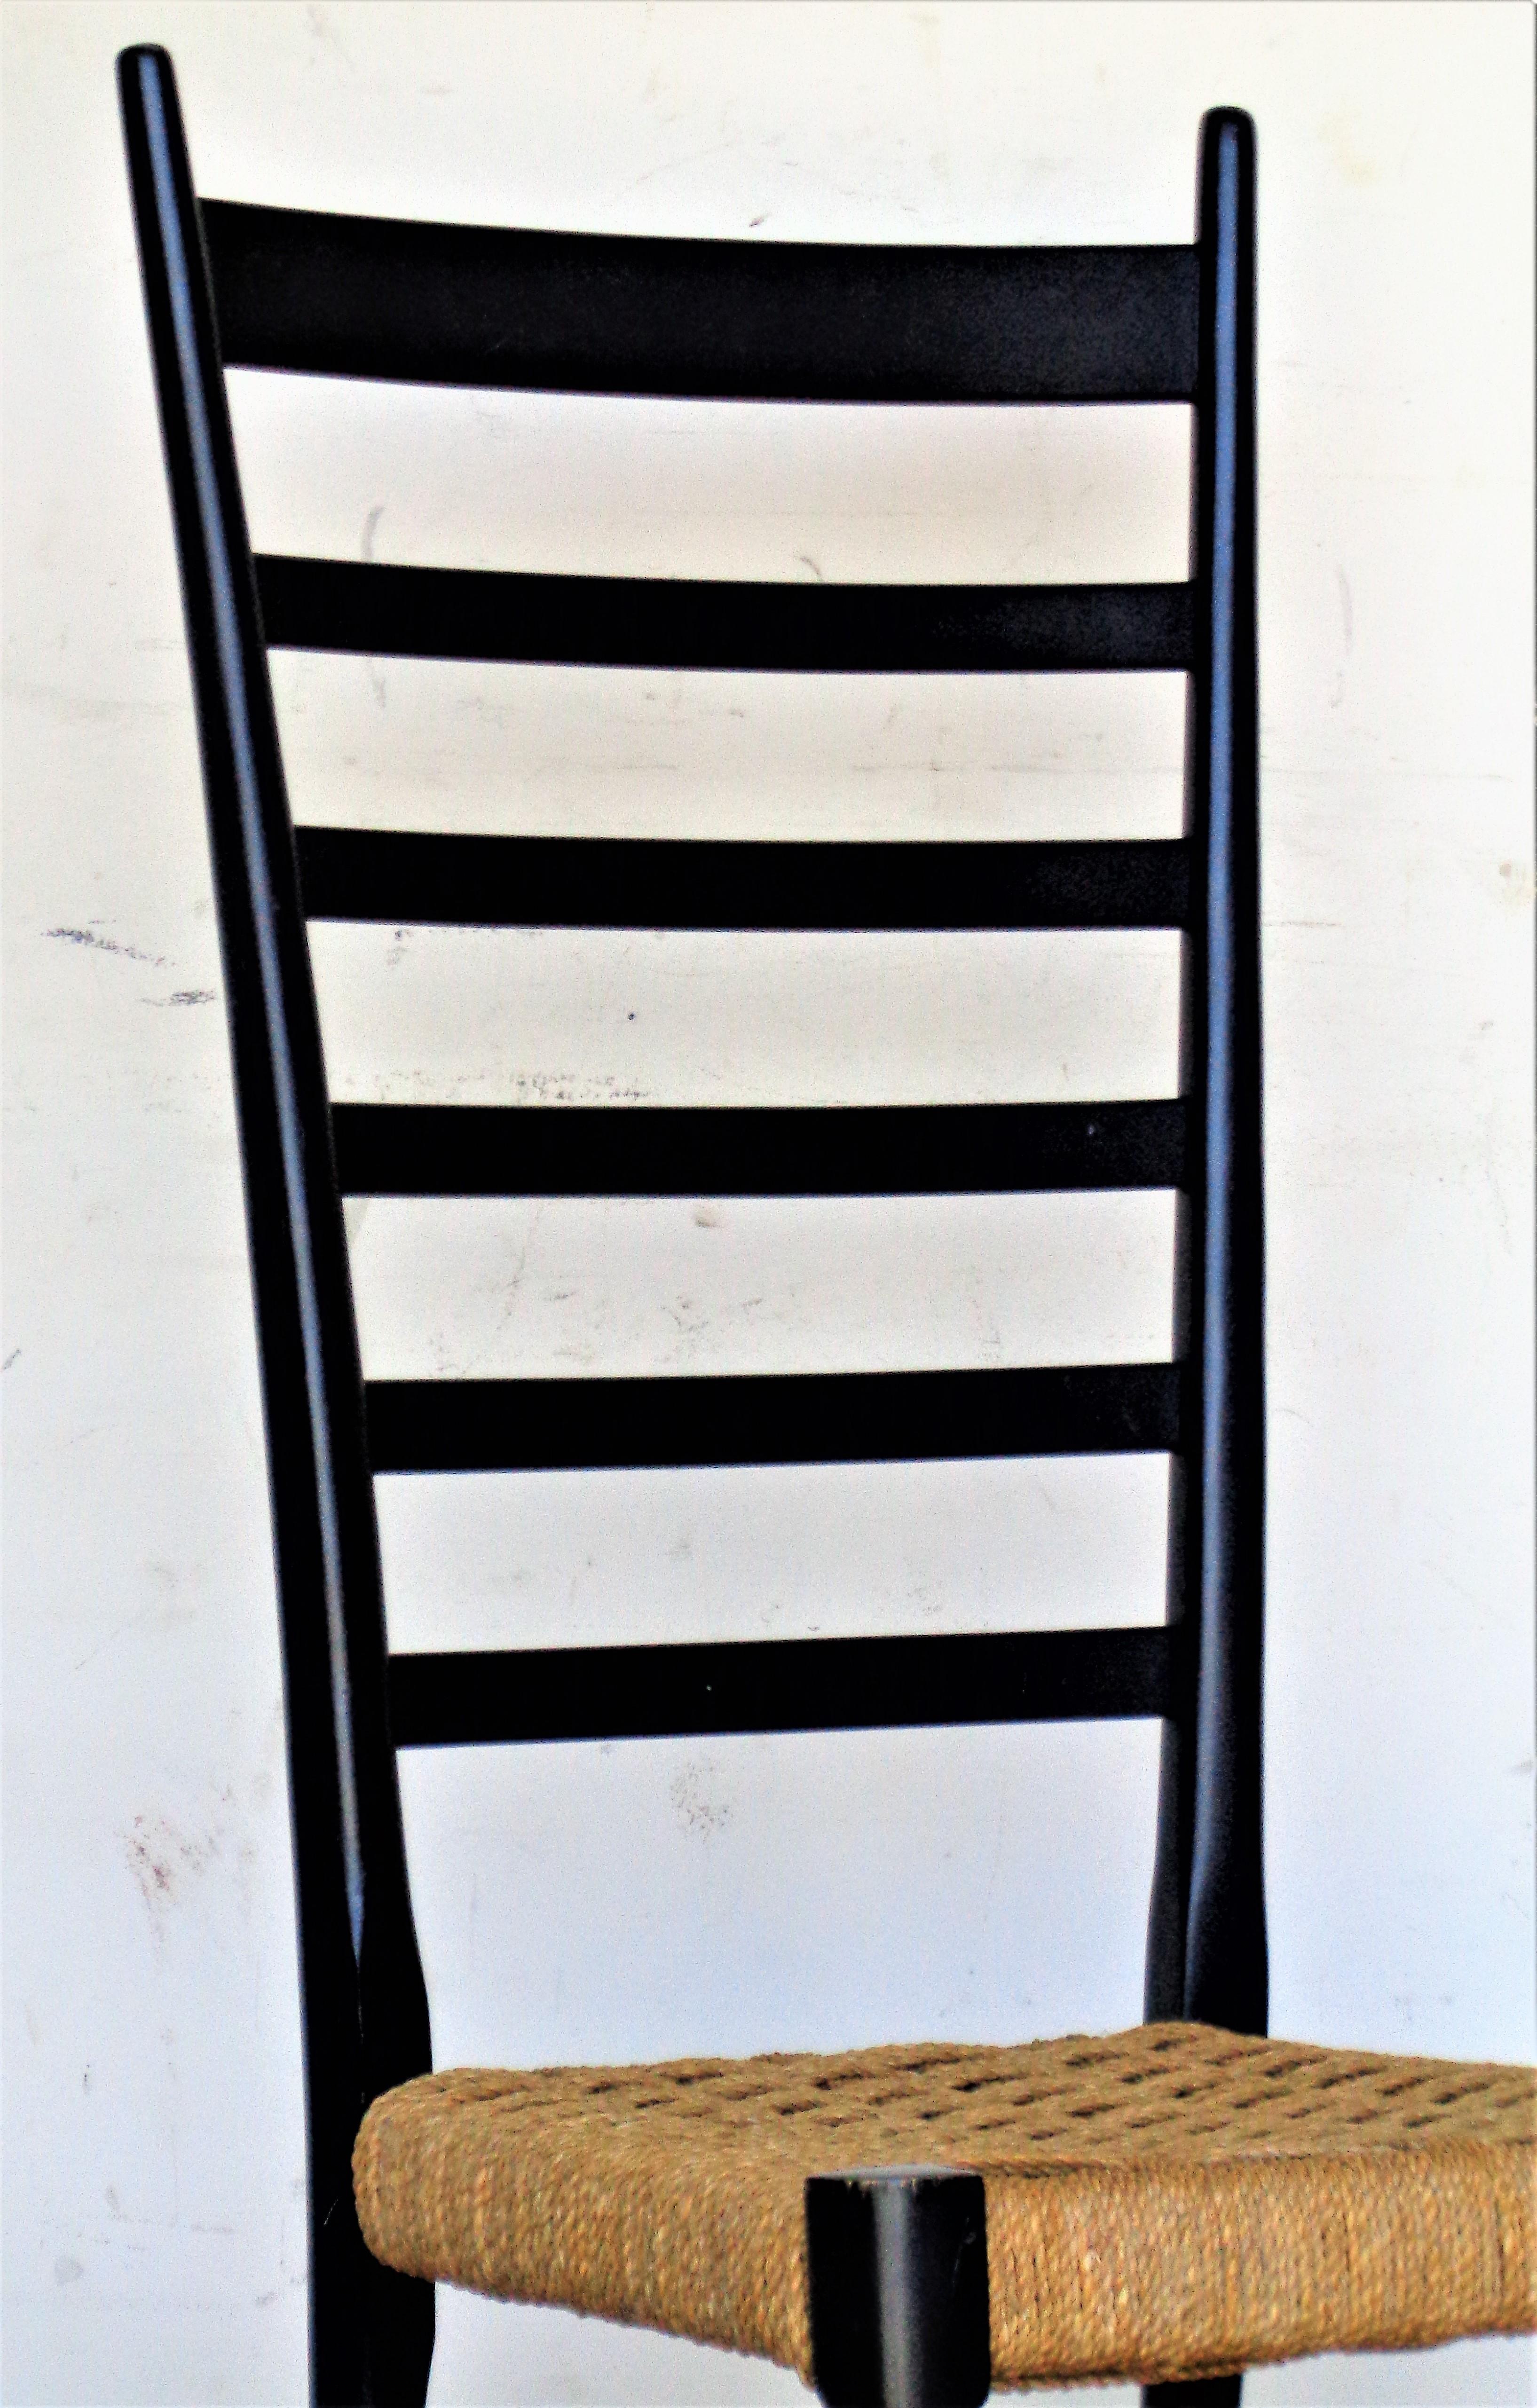 Gio Ponti superleggera style tall modernist ladderback chair in very good all original black lacquered finish and woven rush seat. Gold decal stamped on inner side rail - Made in Italy. Circa 1960. Look at all pictures and read condition report in